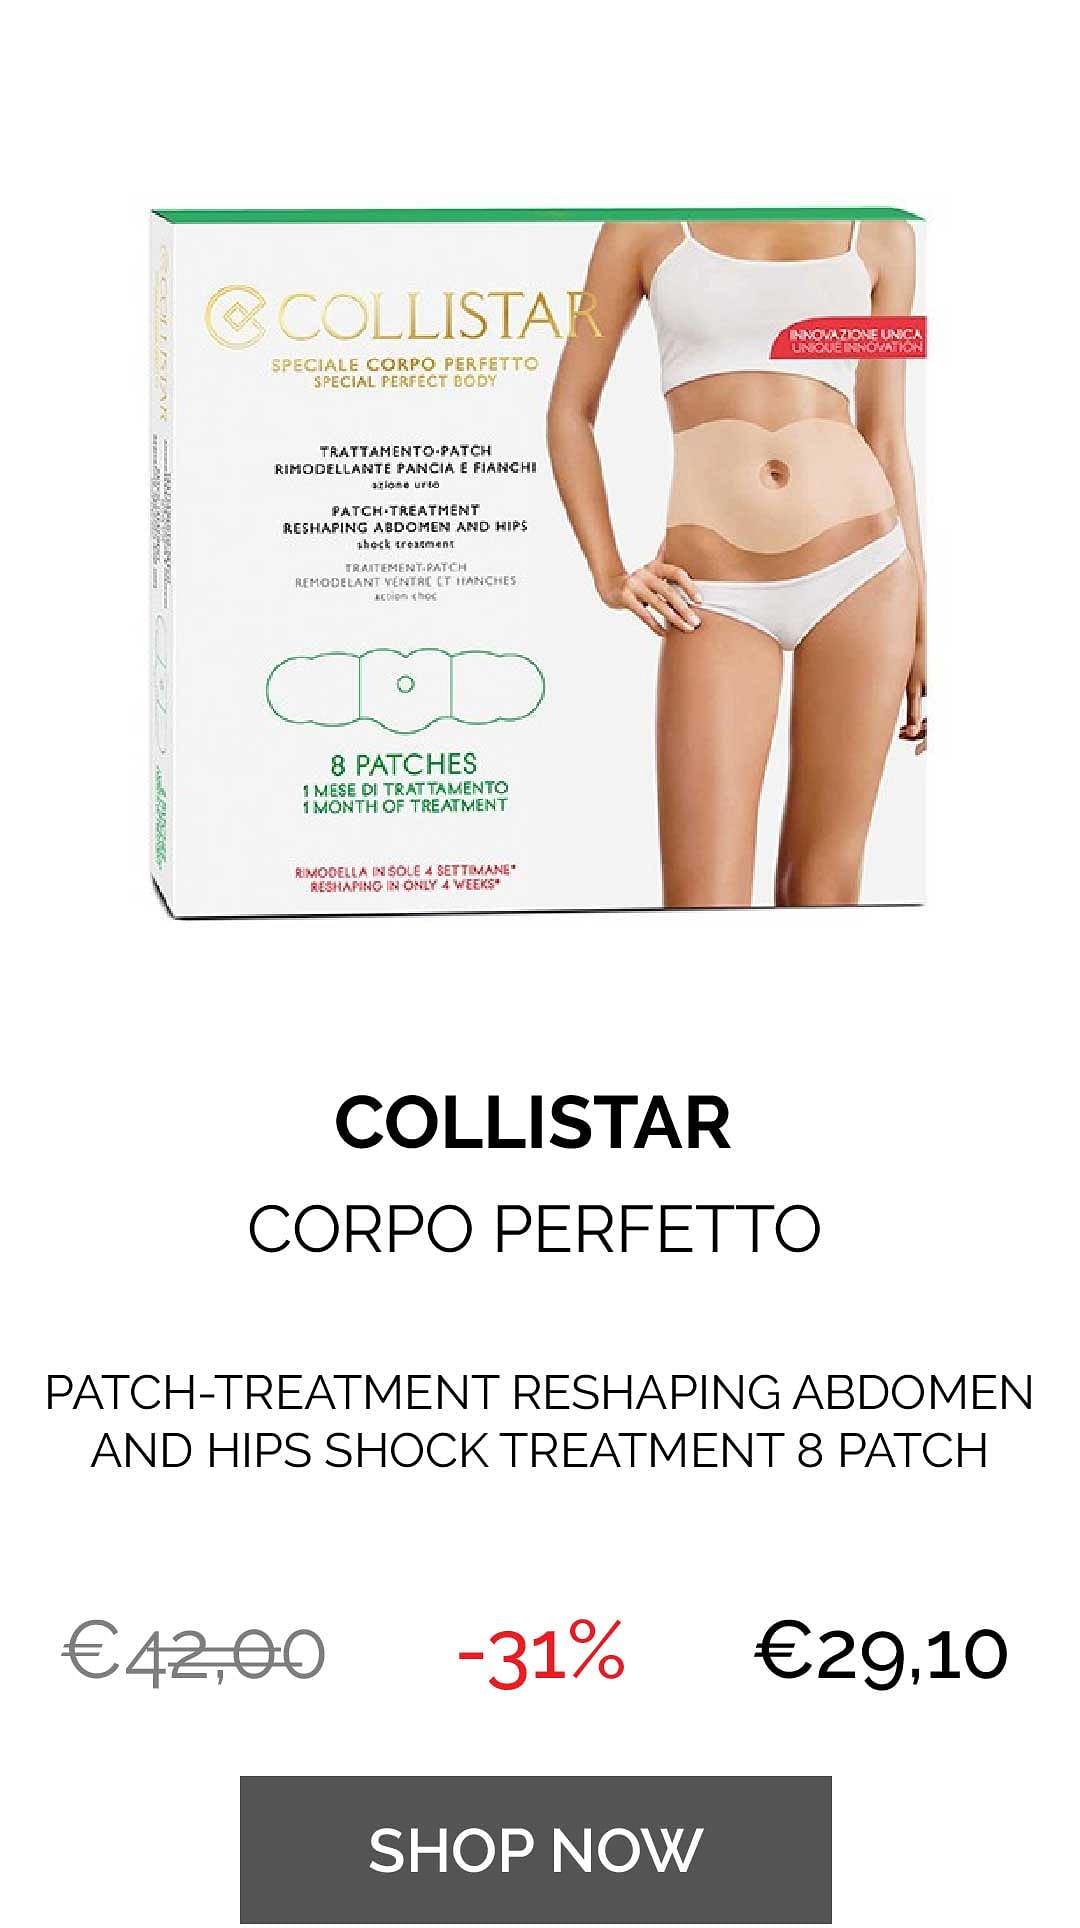 PATCH-TREATMENT RESHAPING ABDOMEN AND HIPS SHOCK TREATMENT 8 PATCH